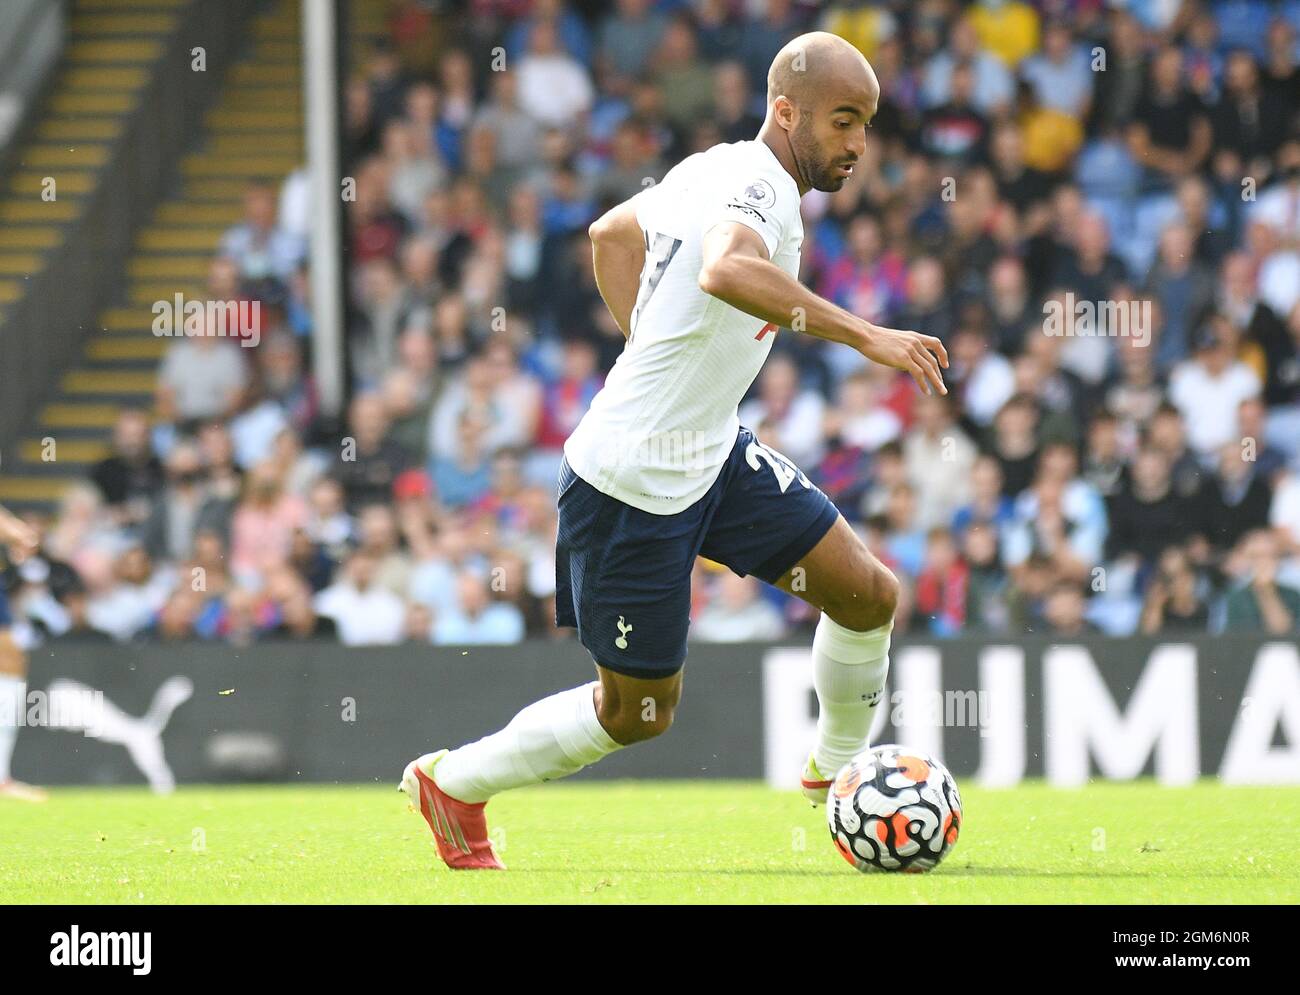 LONDON, ENGLAND - SEPTEMBER 11, 2021: Lucas Rodrigues Moura da Silva of Tottenham pictured during the 2021/22 Premier League matchweek 4 game between Crystal Palace FC and Tottenham Hotspur FC at Selhurst Park. Copyright: Cosmin Iftode/Picstaff Stock Photo